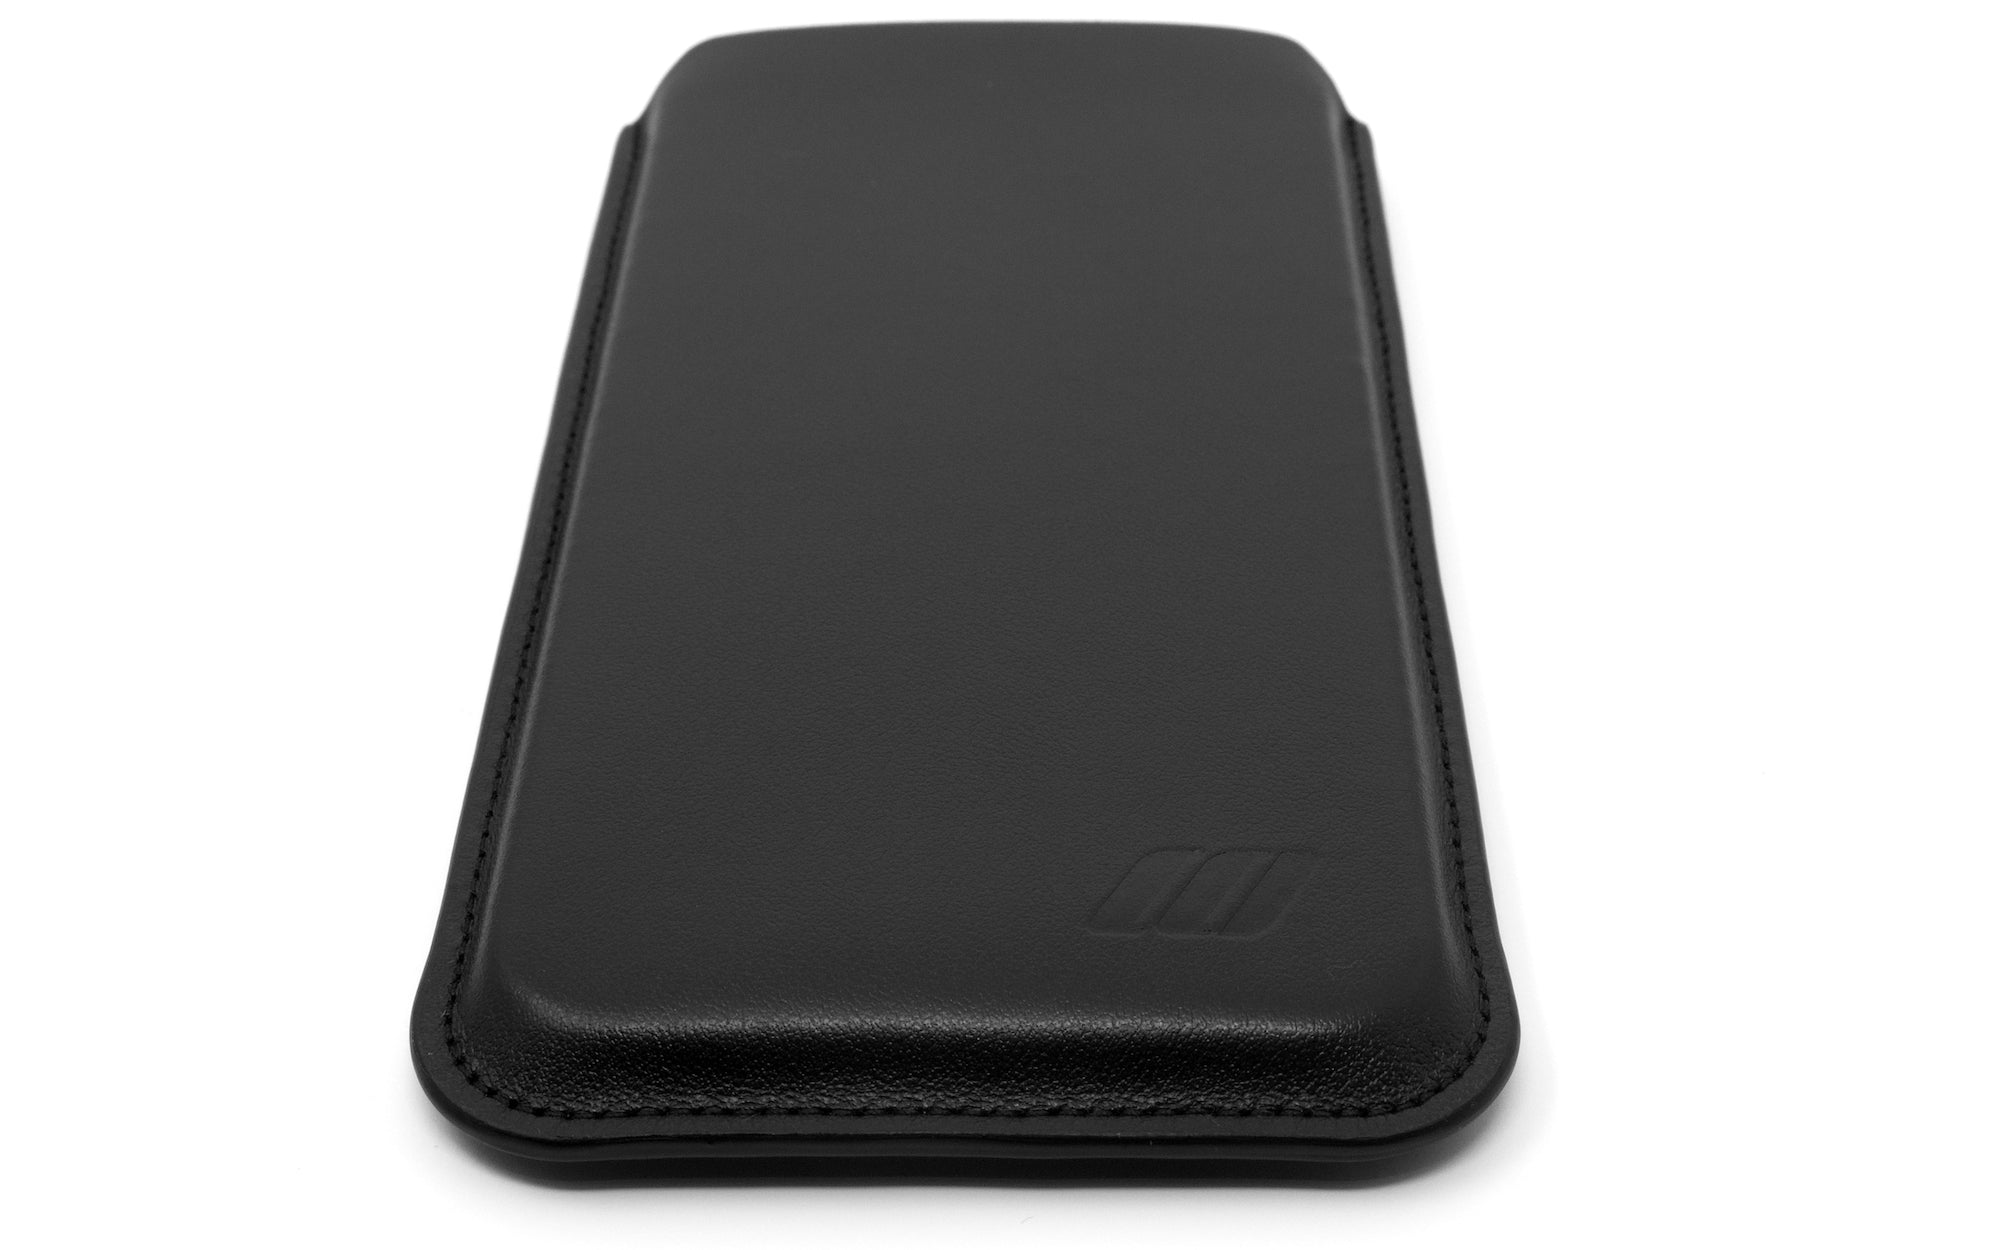 Apple iPhone 14 Pro Leather Sleeve Case - Skinny Fit - Black